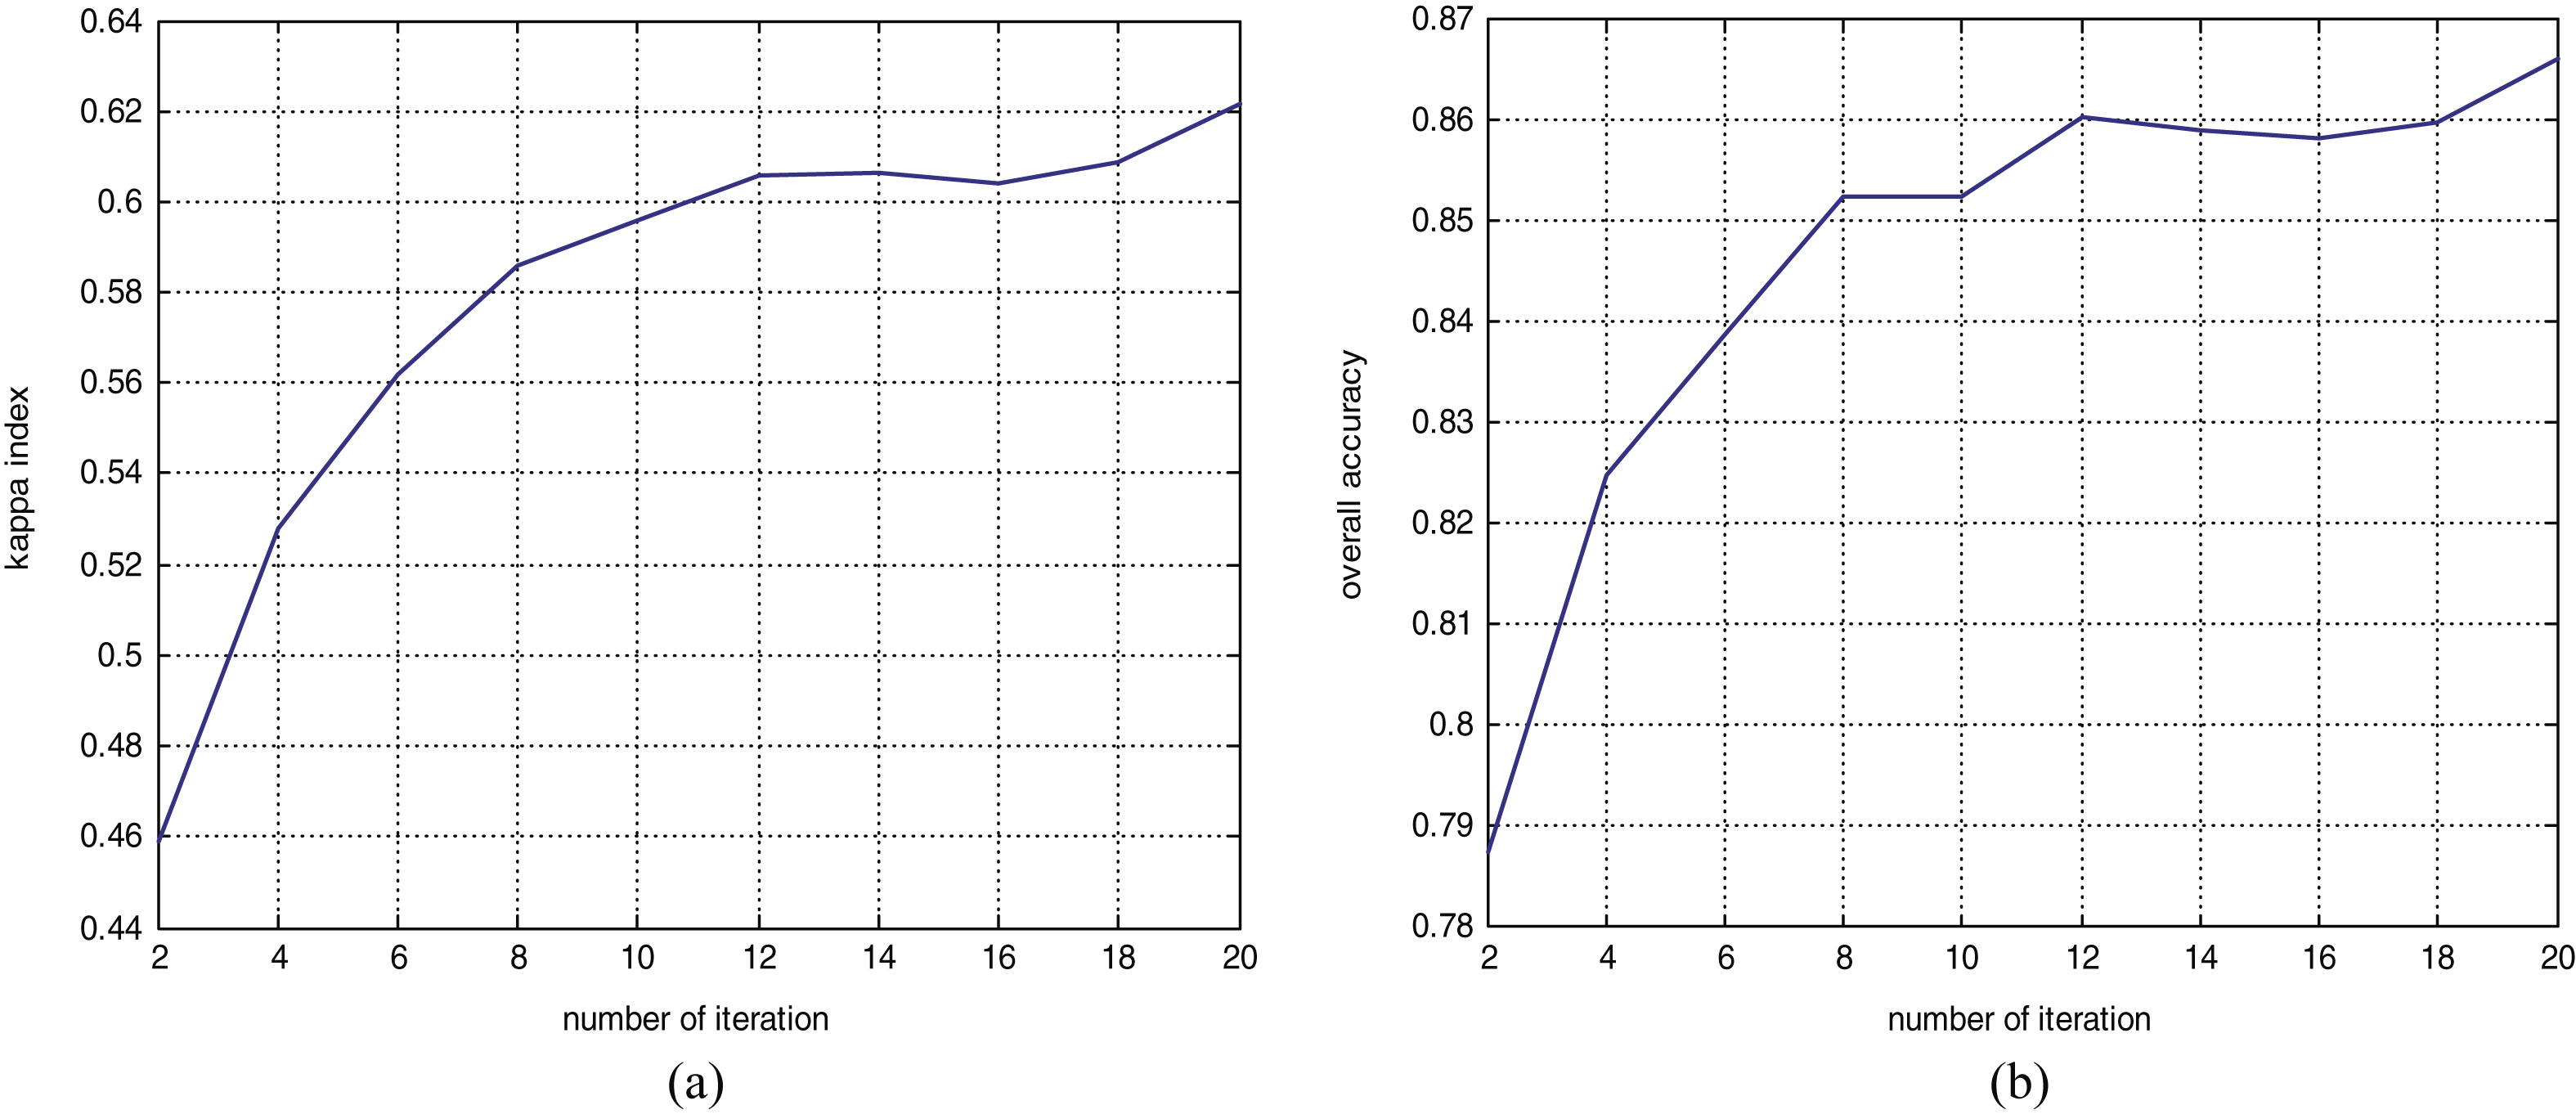 Classification performance indices with different numbers of iterations. (a) kappa index; (b) overall accuracy.